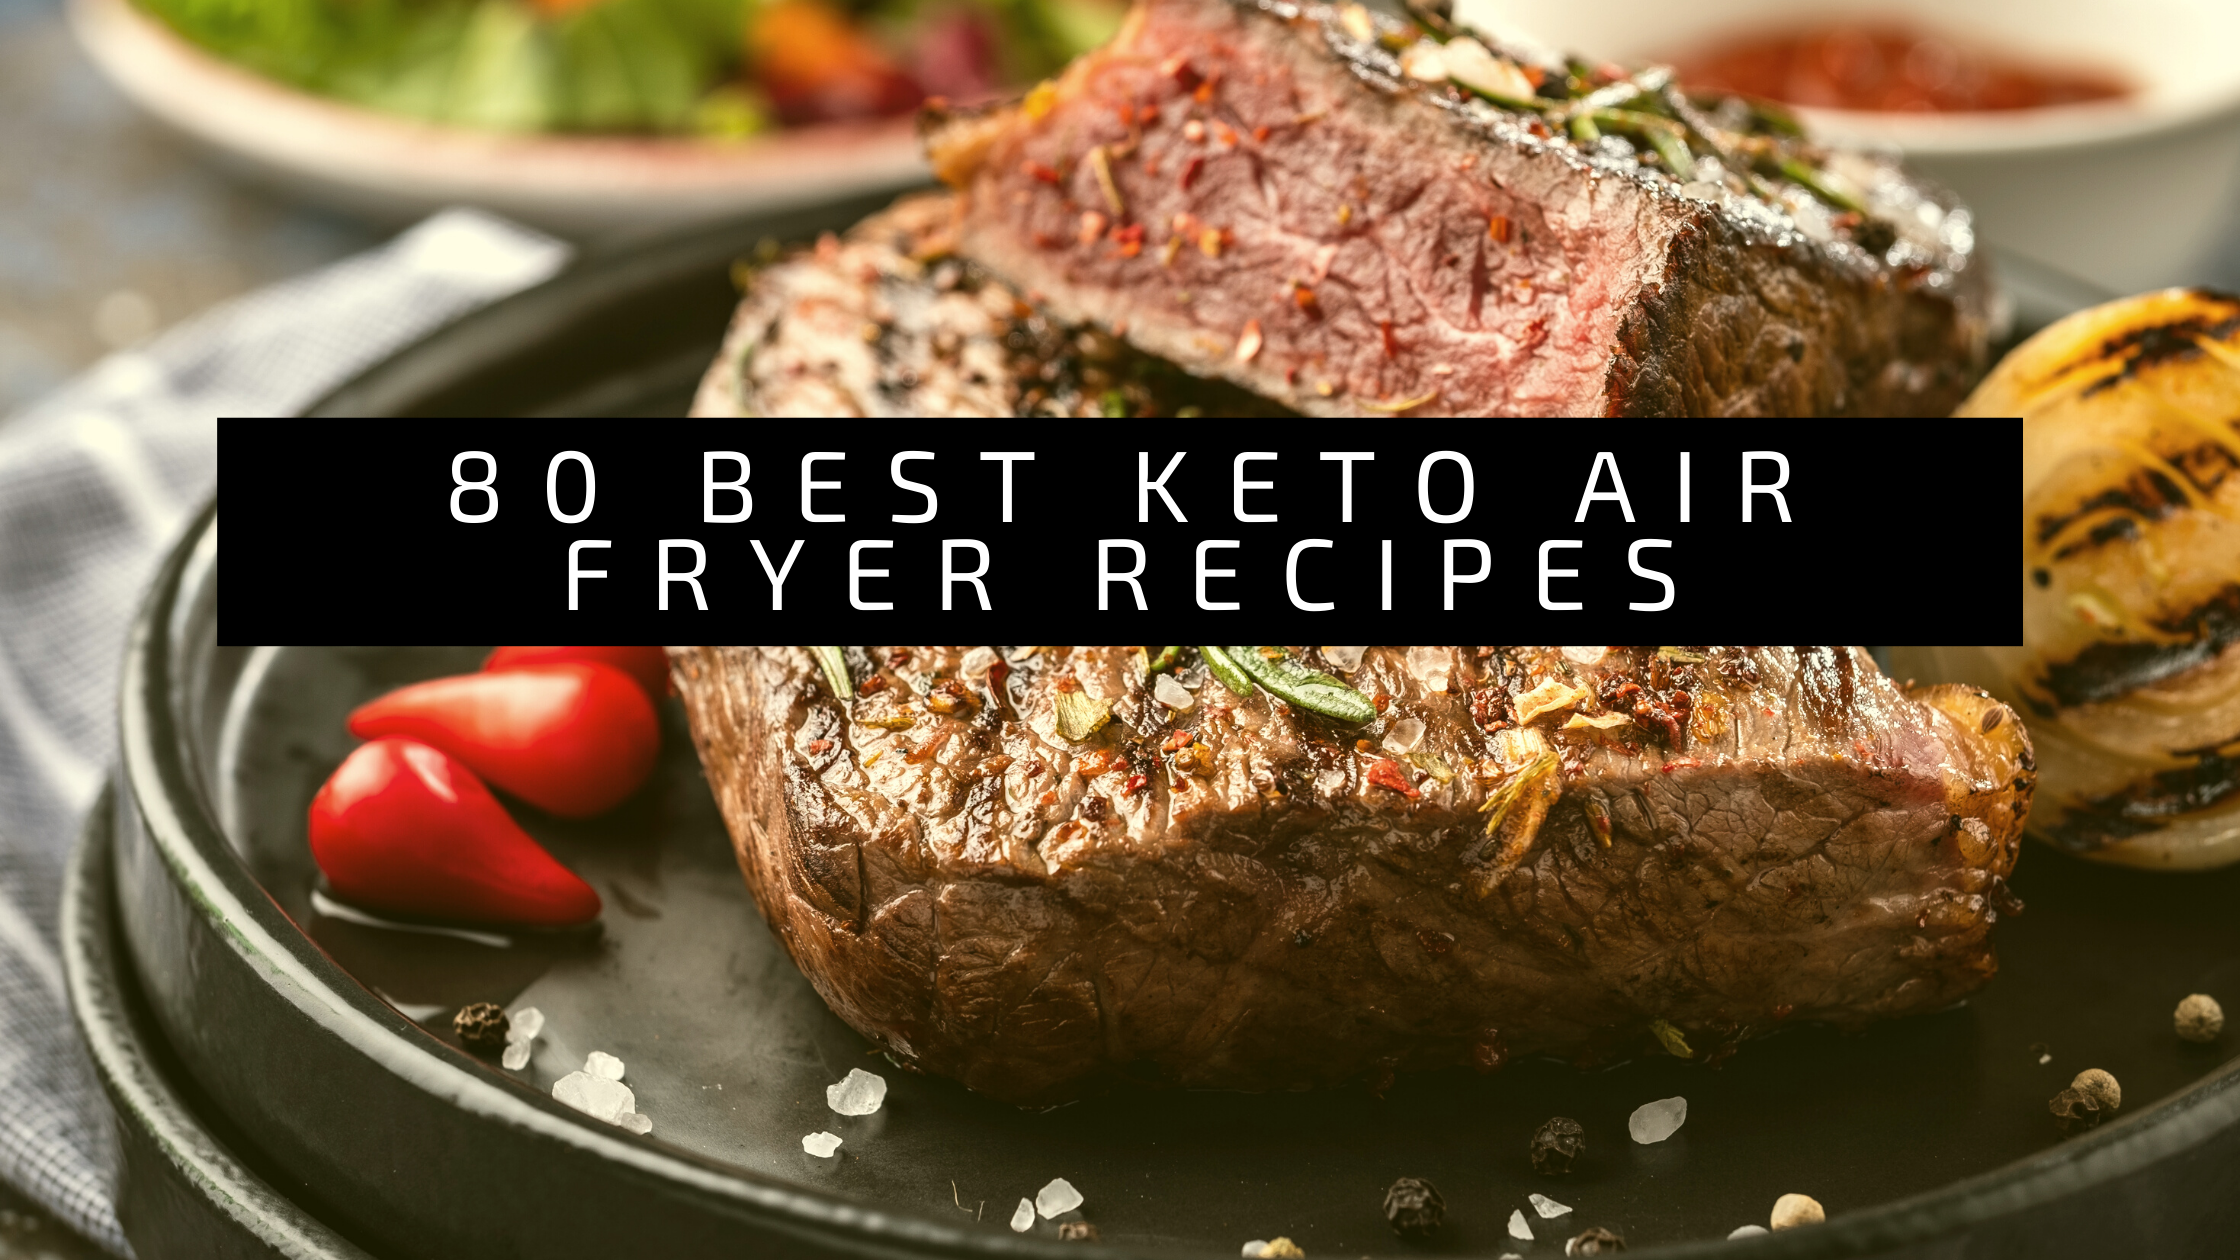 40 Family-Friendly Keto Air Fryer Recipes for Quick and Delicious Meals 74